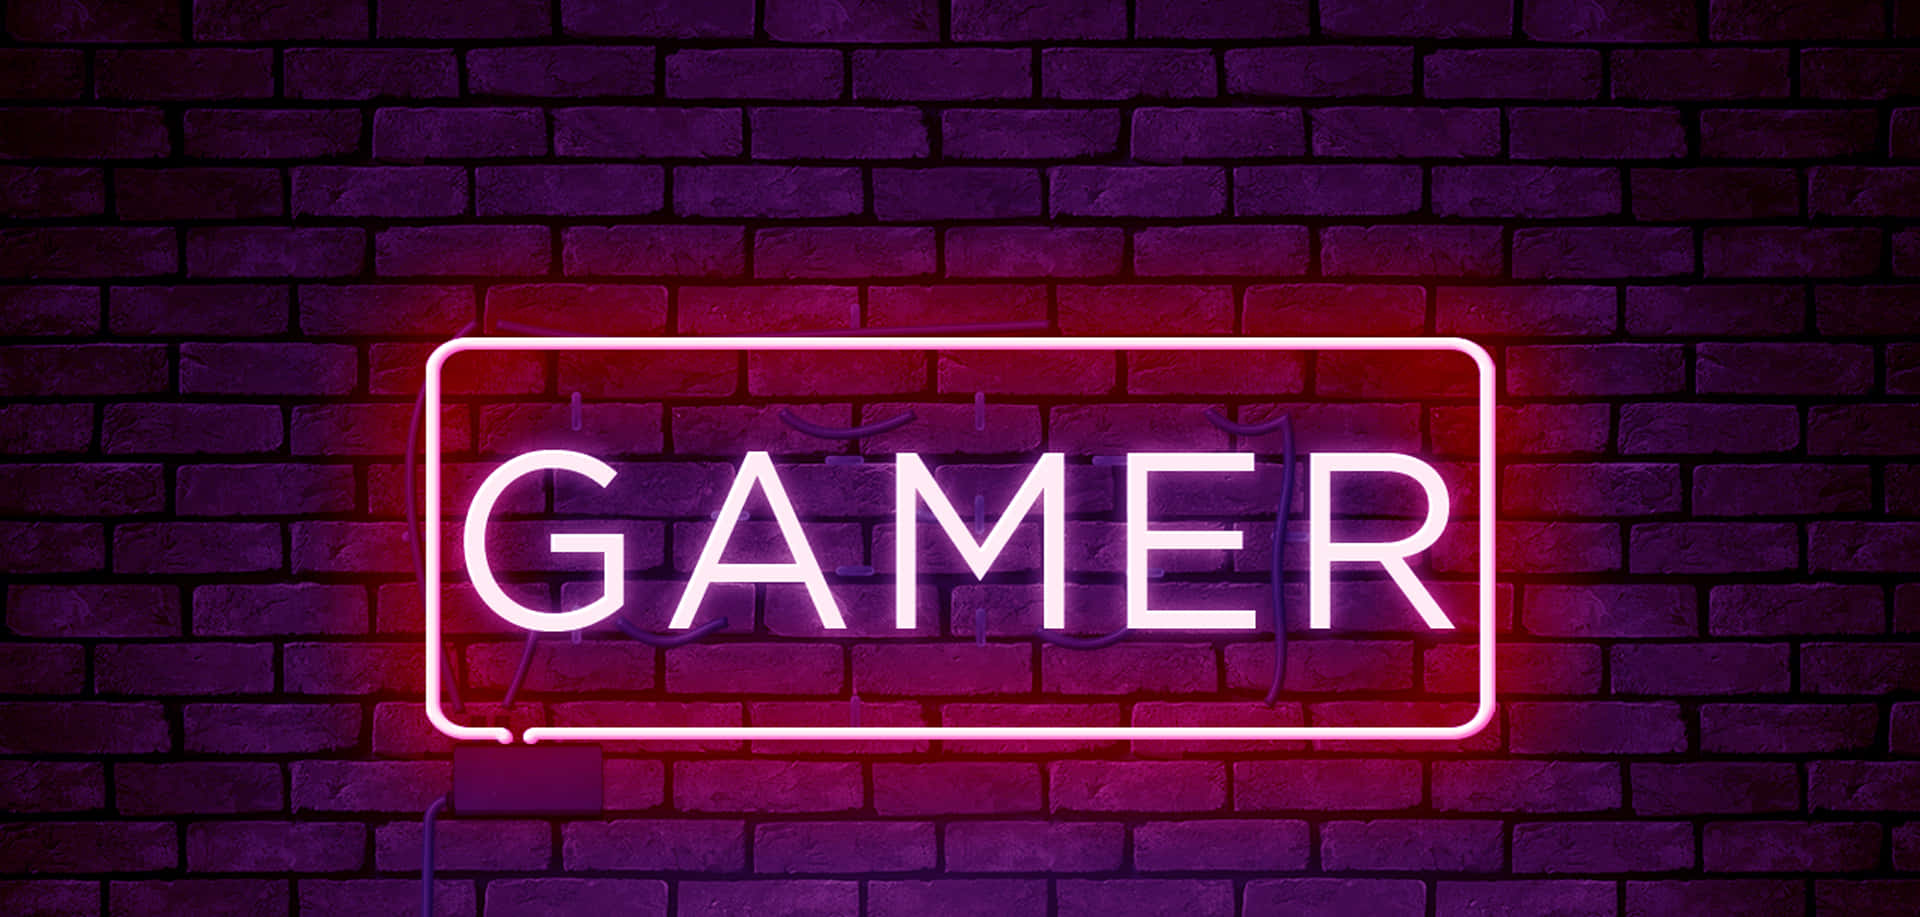 Come and explore the world of Neon Gaming Wallpaper